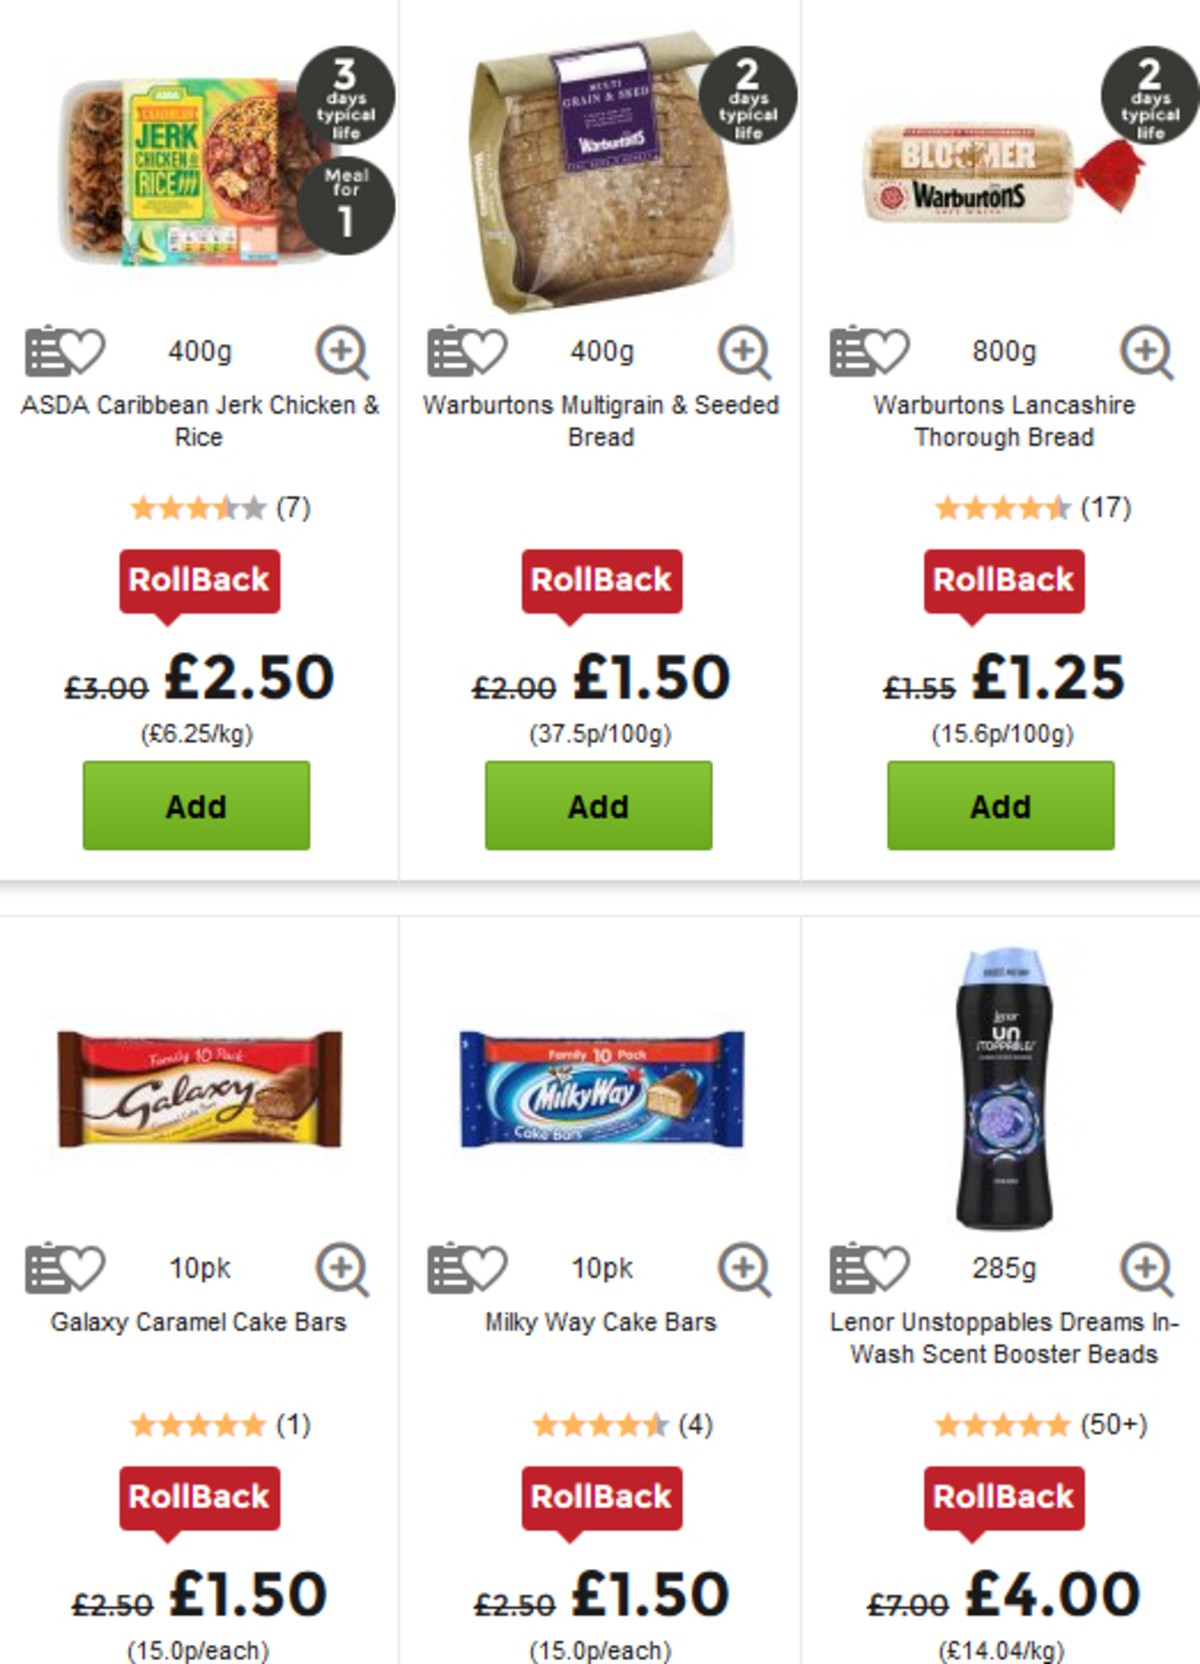 ASDA Offers from 5 April